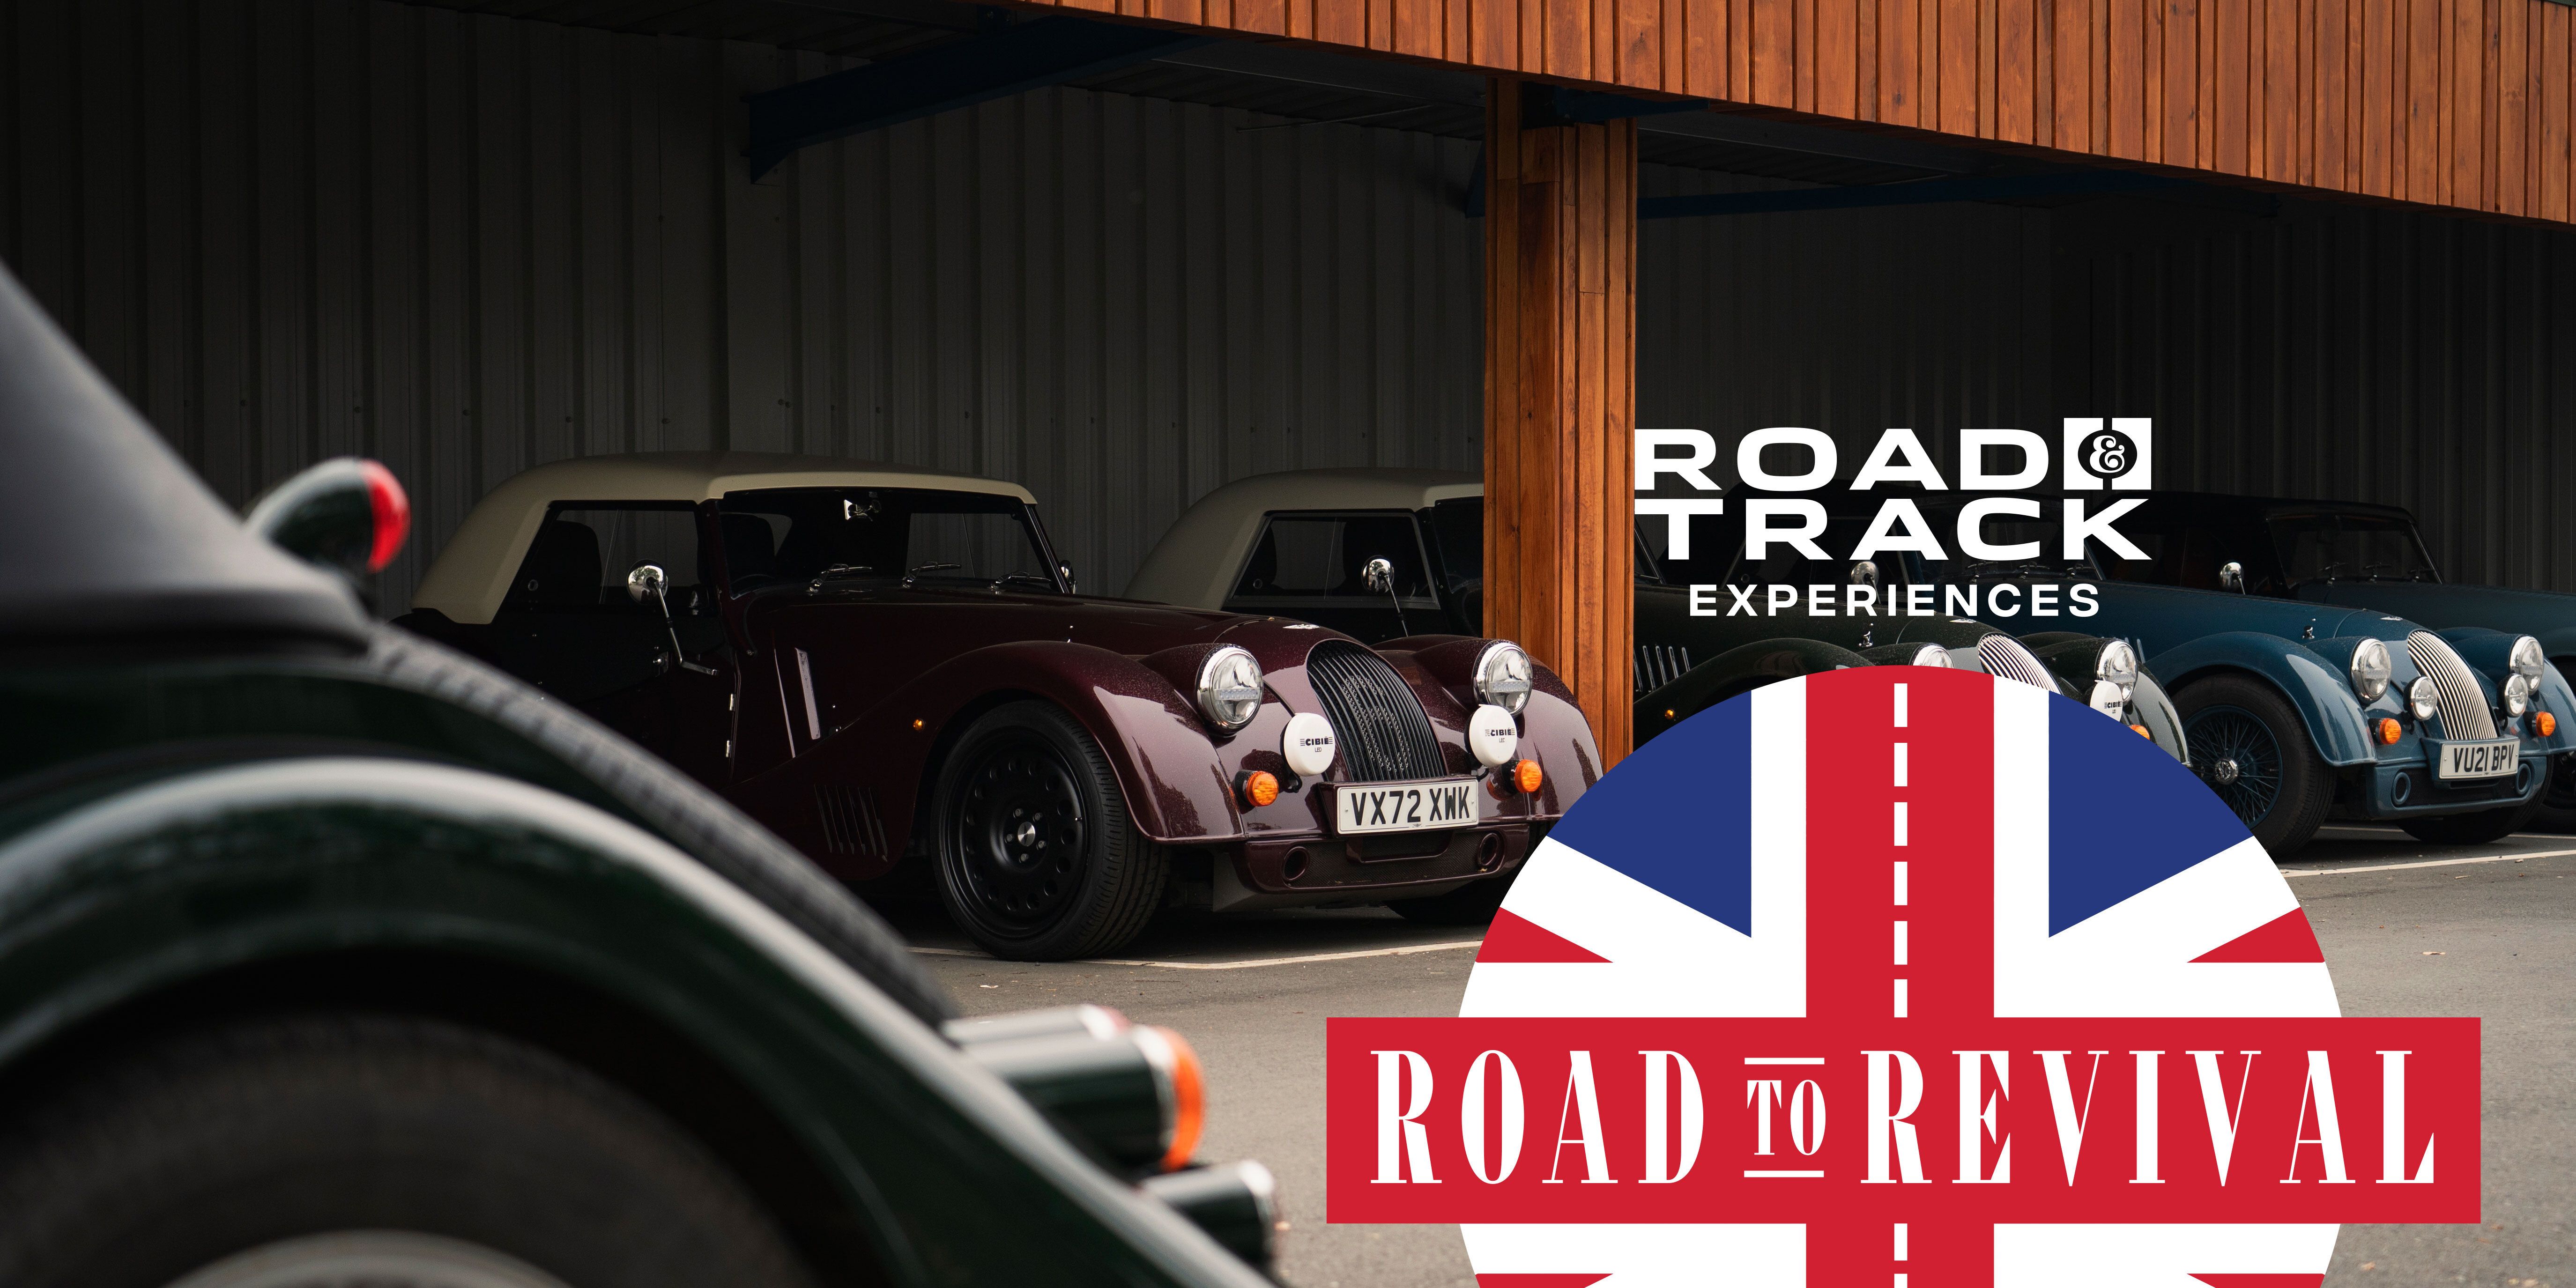 Road & Track's Road to Revival Was a Week of British Motorcar Excellence